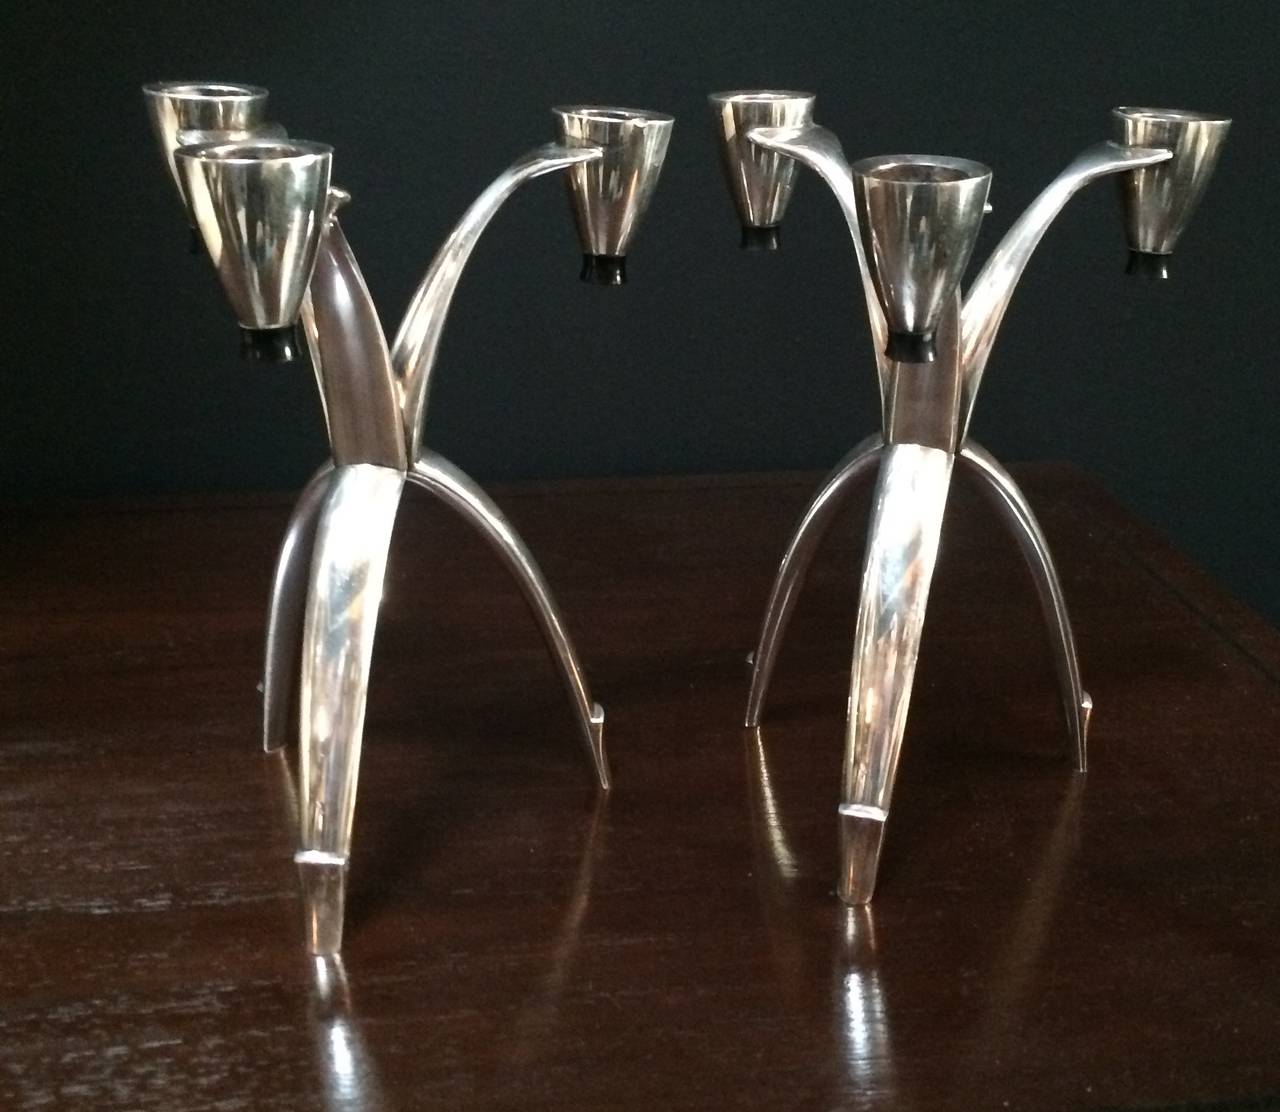 Modern silver three legged and very sexy candle sticks with black detail at tip of each candle holder and leg detail - perfect for dining or on the mantle